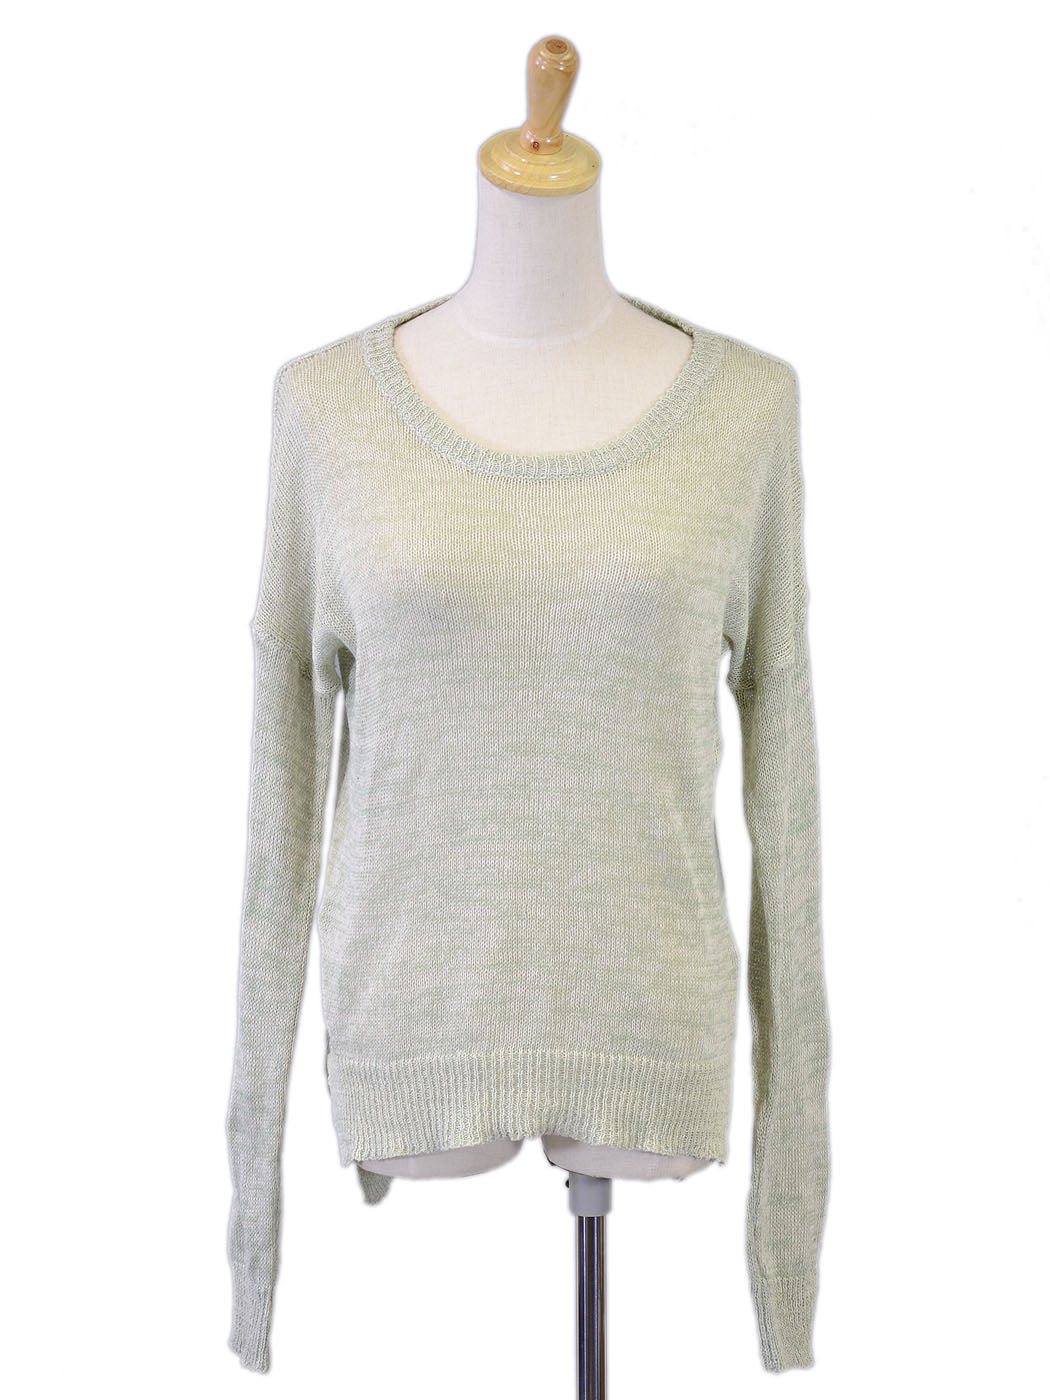 Cotton Candy Light Knit High Low Scoop Neck Long Sleeve Side Cutouts Top - ALILANG.COM